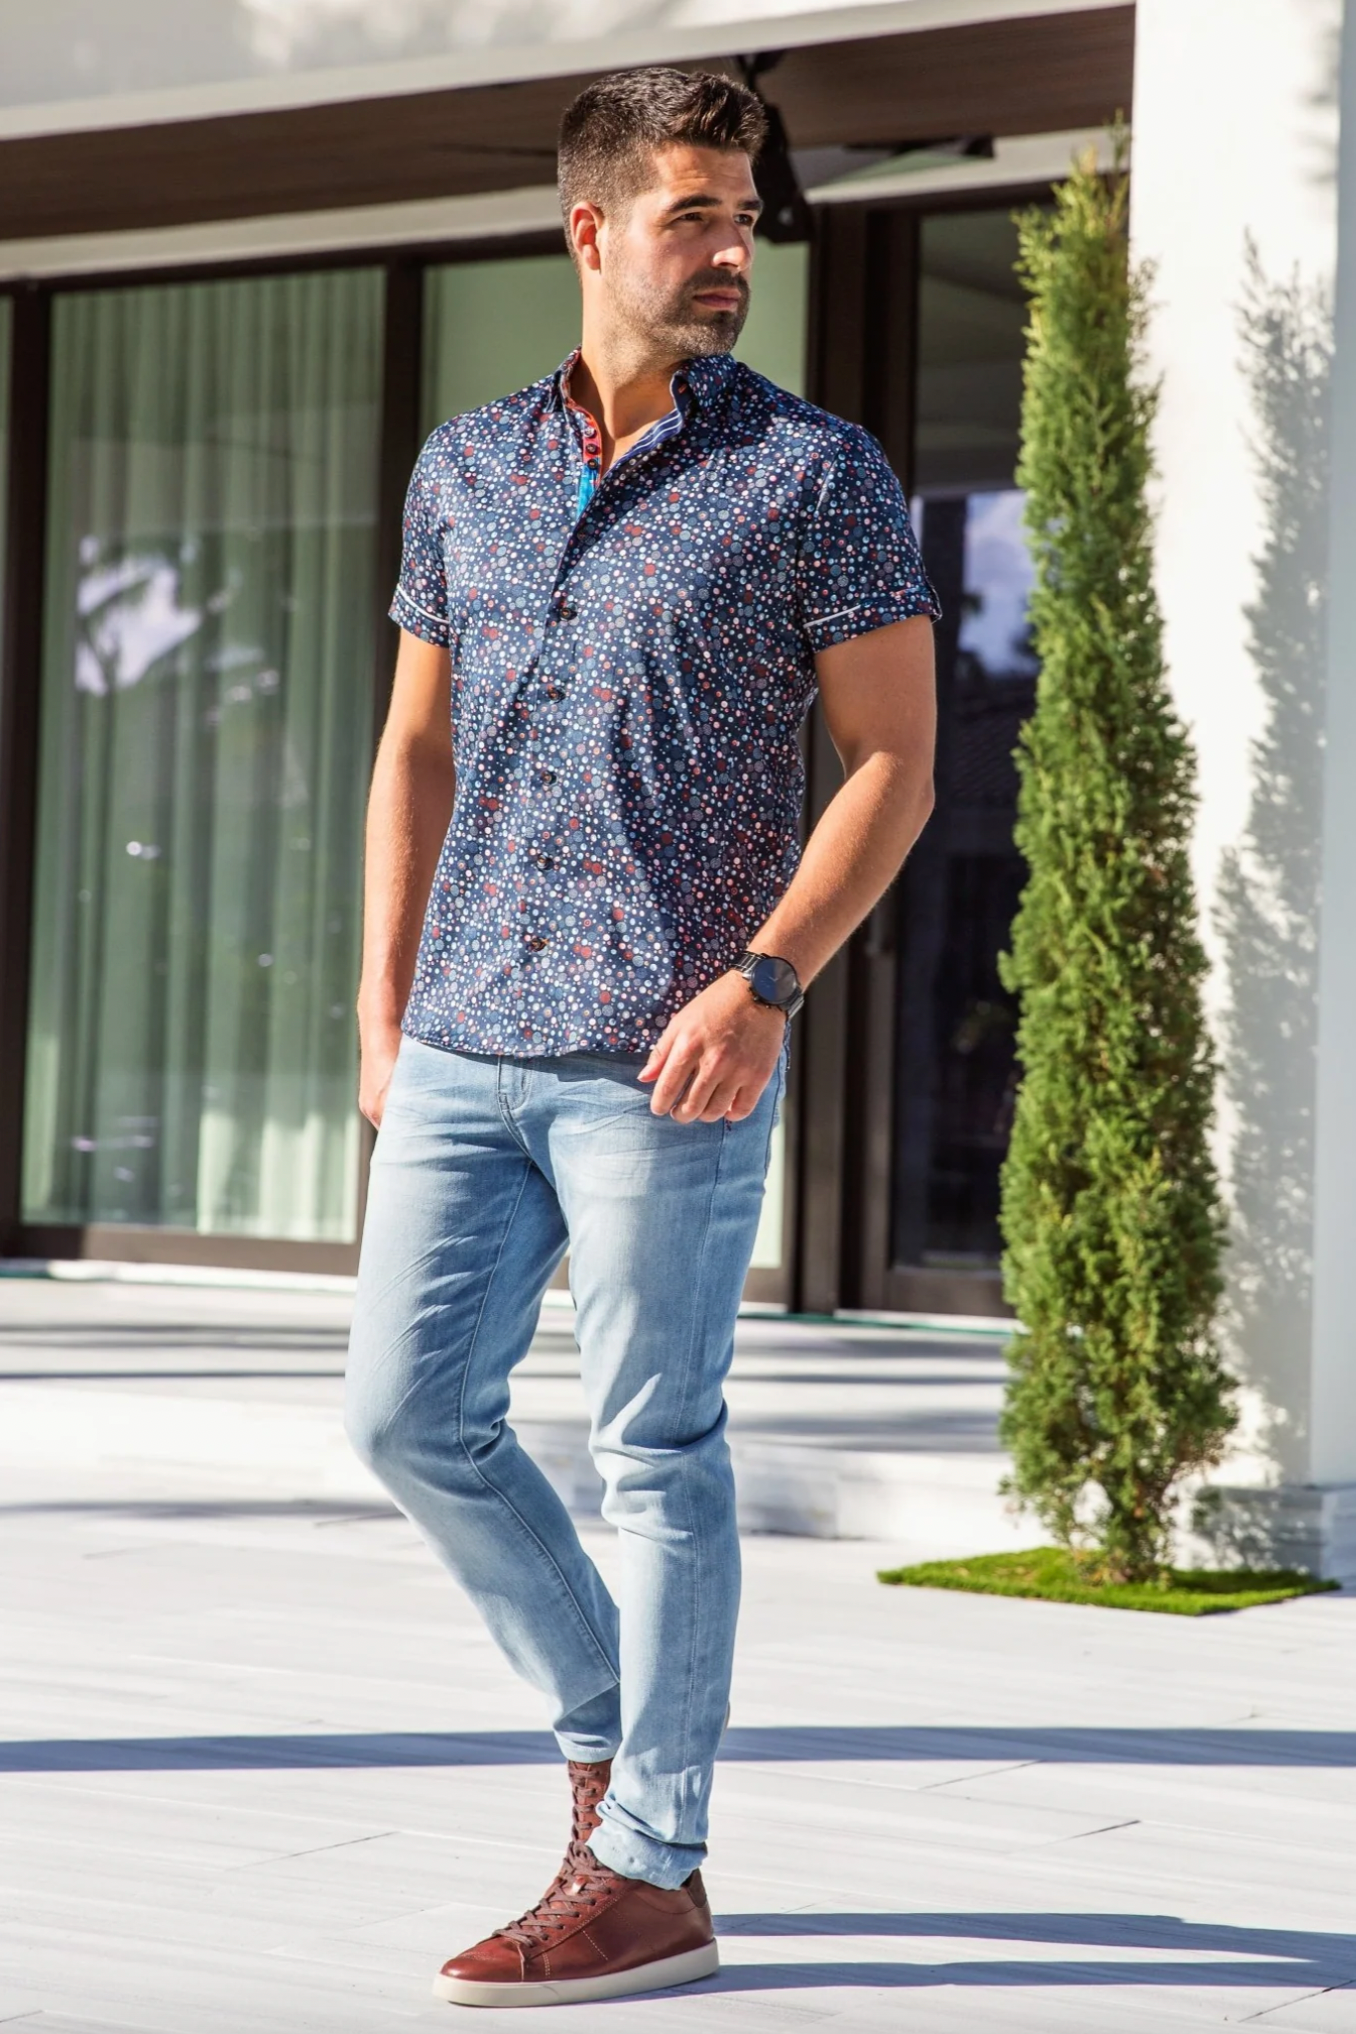 The Au Noir SPIRO Short Sleeve Dress Shirt is a Canadian-owned and designed brand that combines modern style with comfort. Featuring an angled buttonhole and multiple embroidery detailing an AU NOIR signature, this shirt exudes sophistication and versatility.